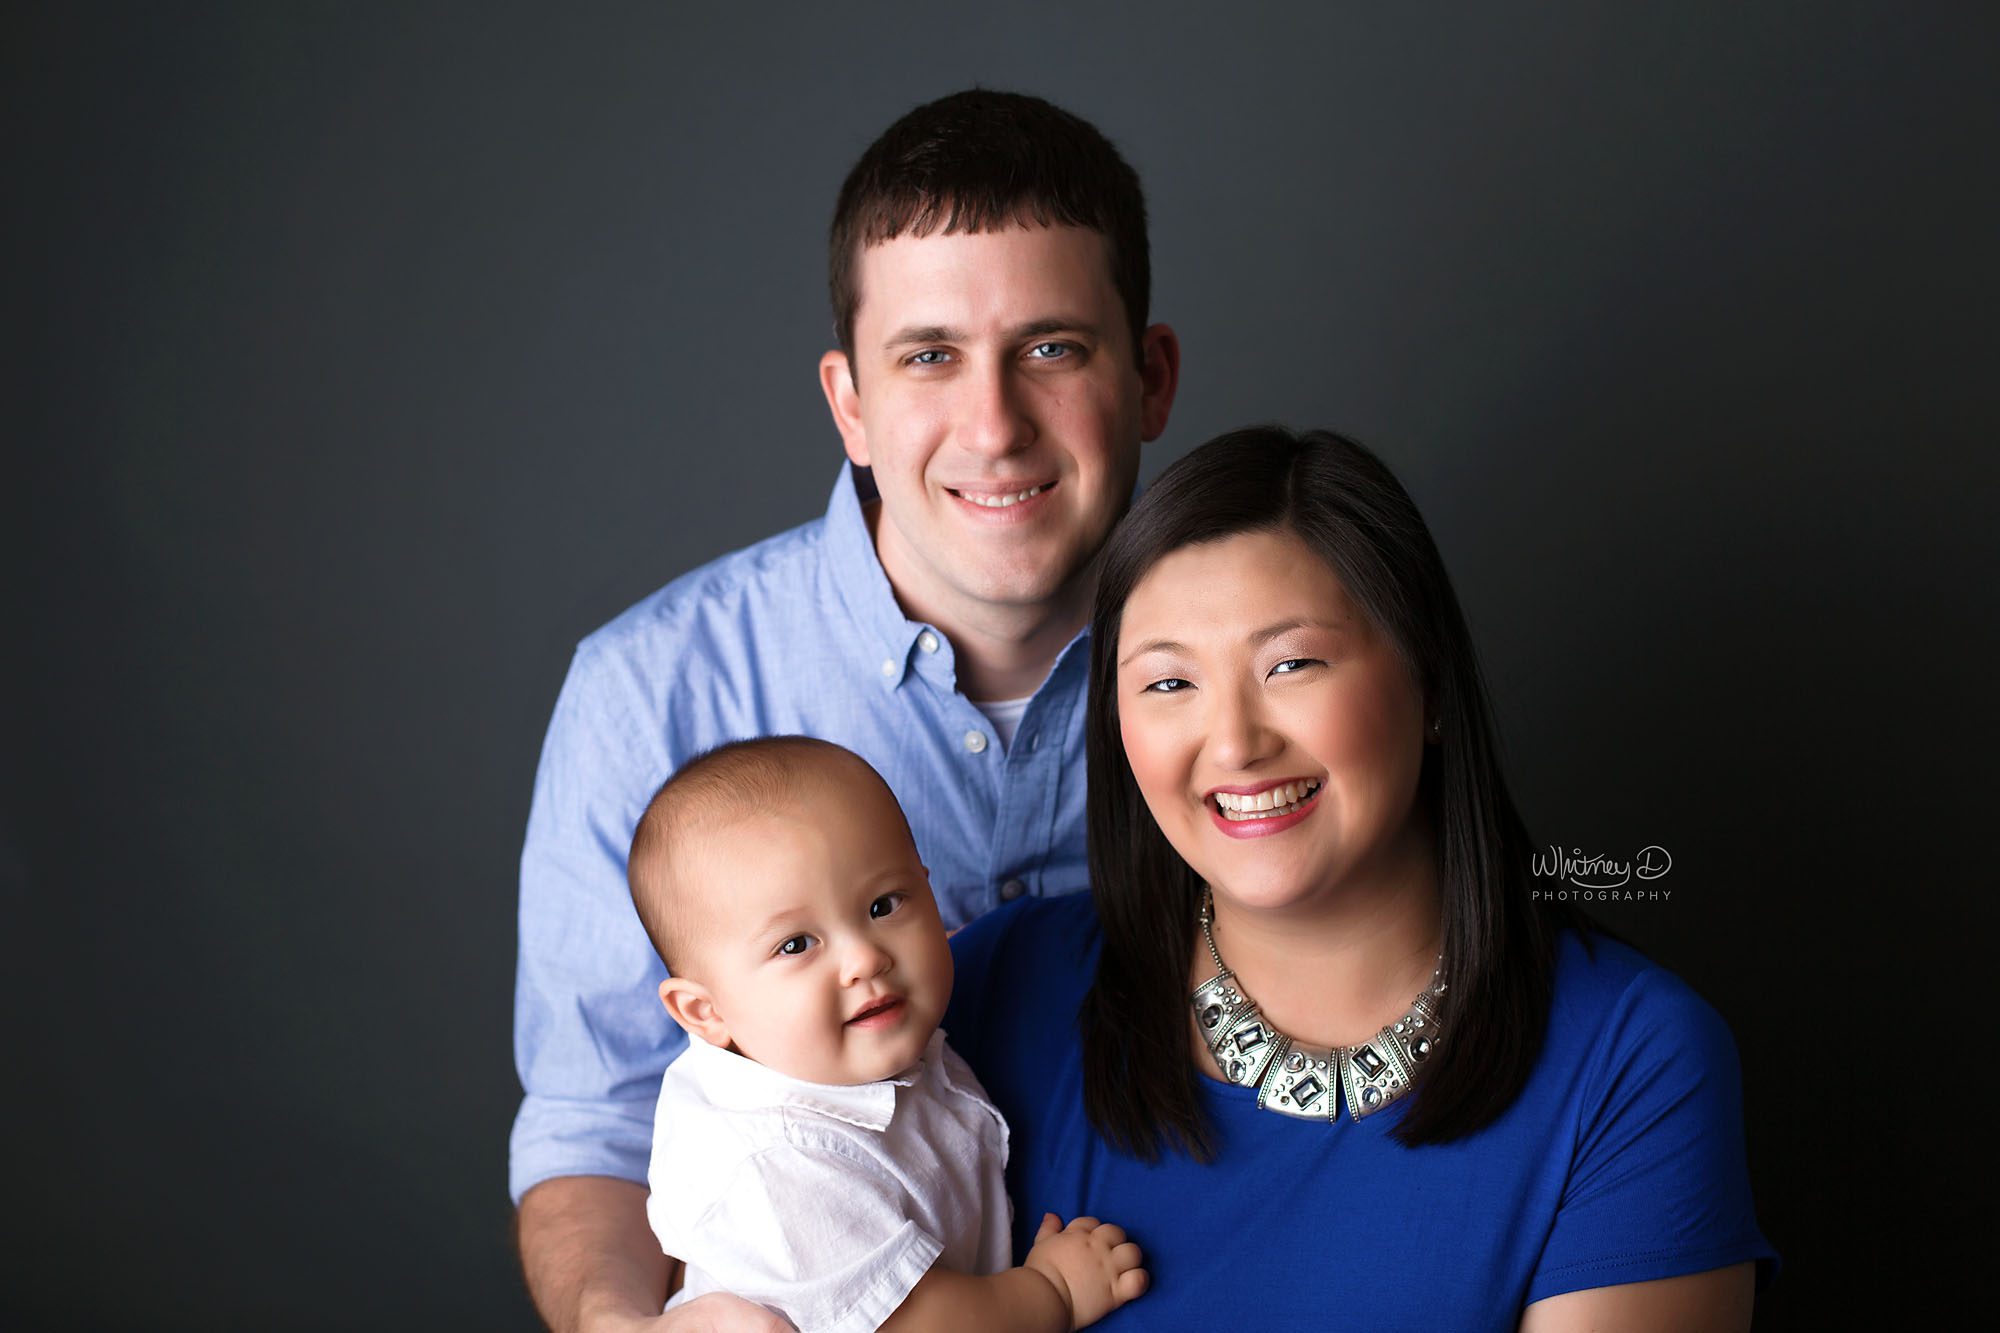 Baby Boy with his Mom and Dad at Whitney D Photography in Conway, Arkansas